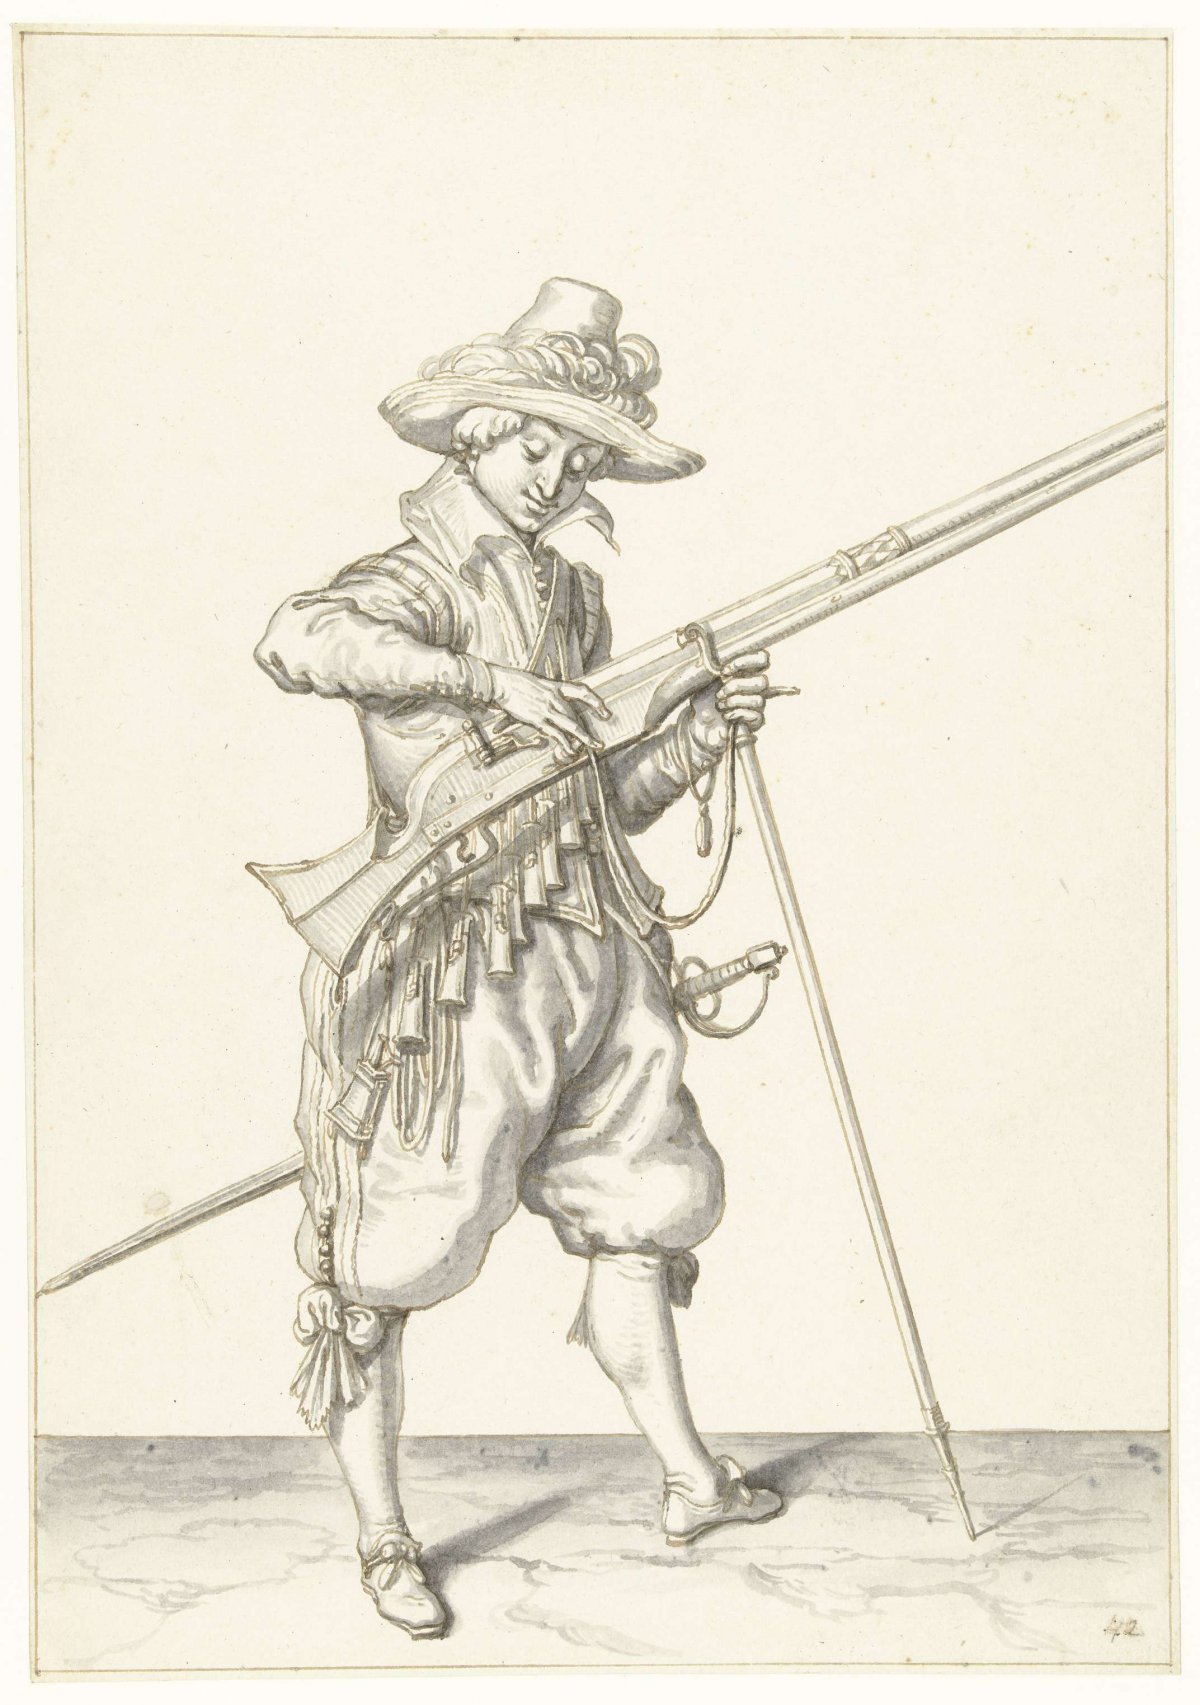 Soldier on guard giving the fuse on the cock of his musket the proper place and shape, Jacques de Gheyn (II), 1596 - 1606